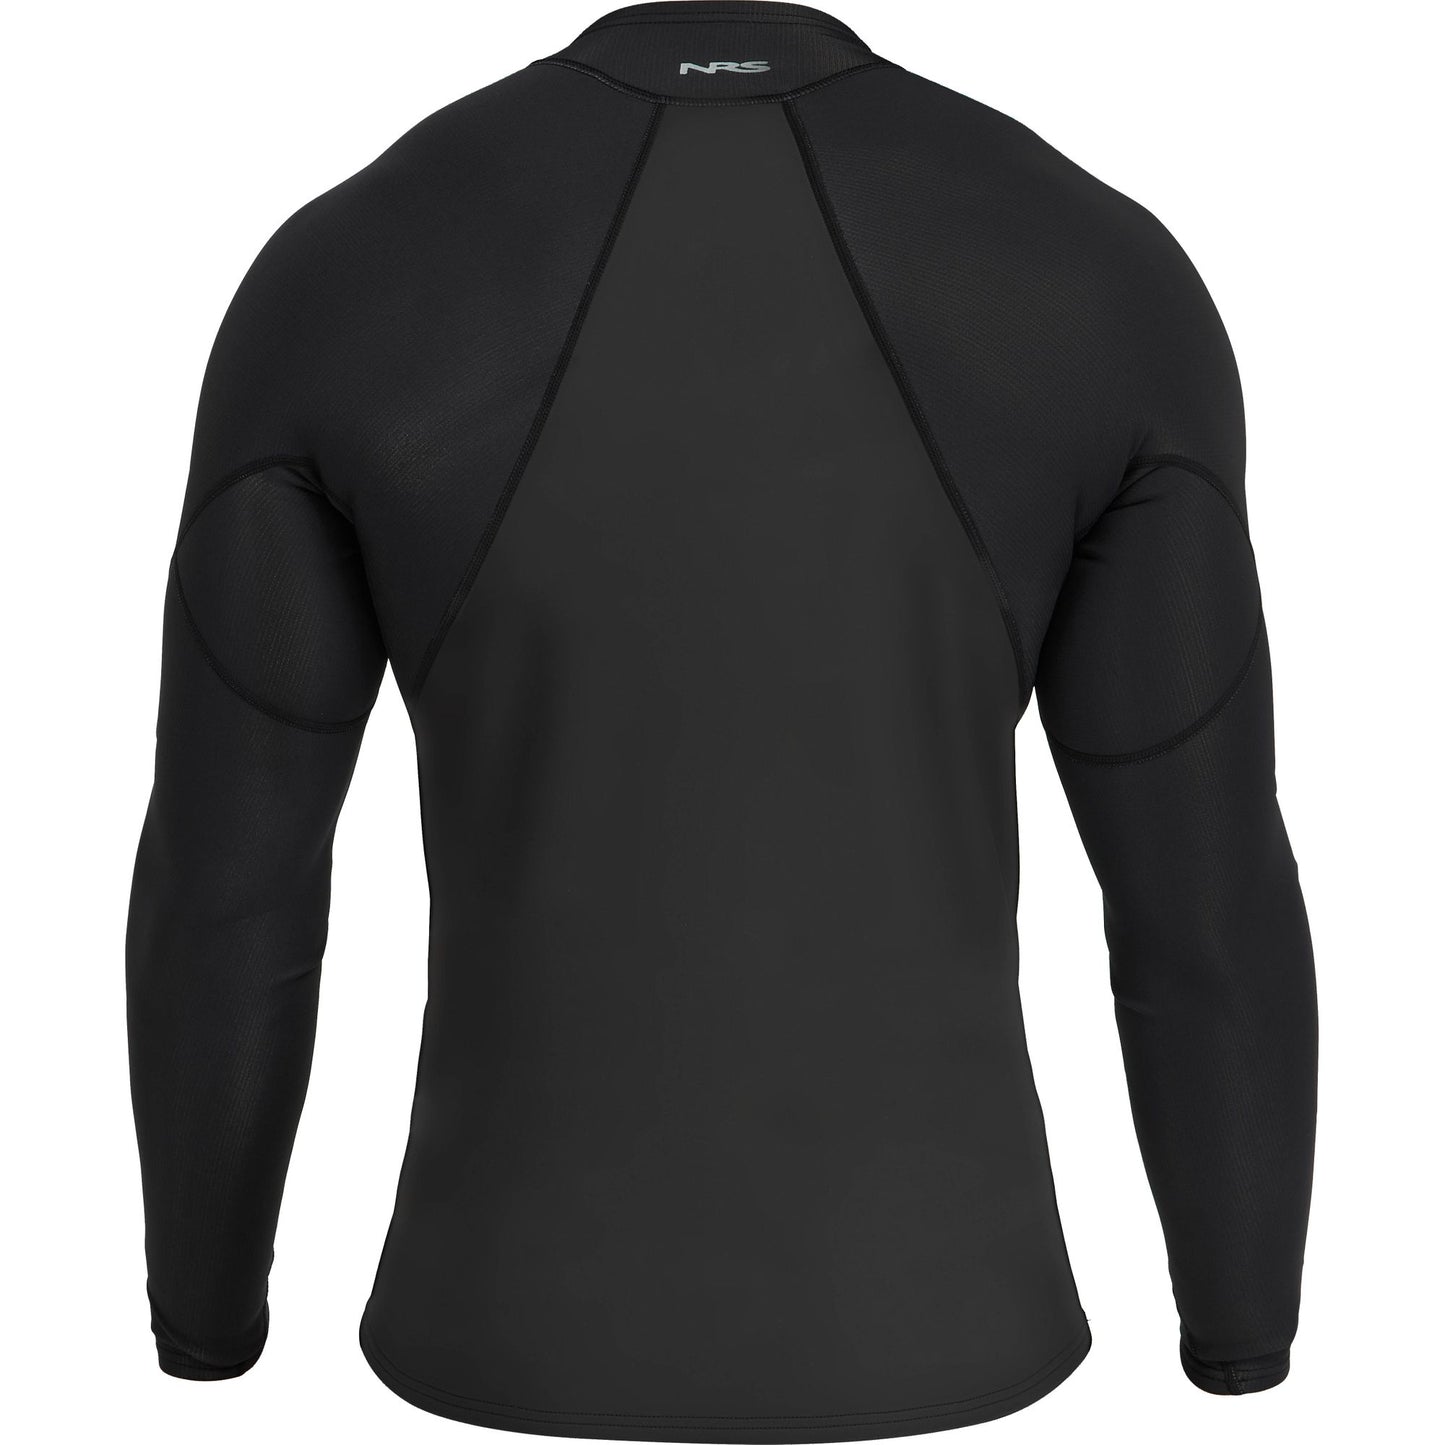 The back view of the NRS men's Hydroskin 1.0 Long Sleeve Shirt made with raw neoprene for cold water activities.